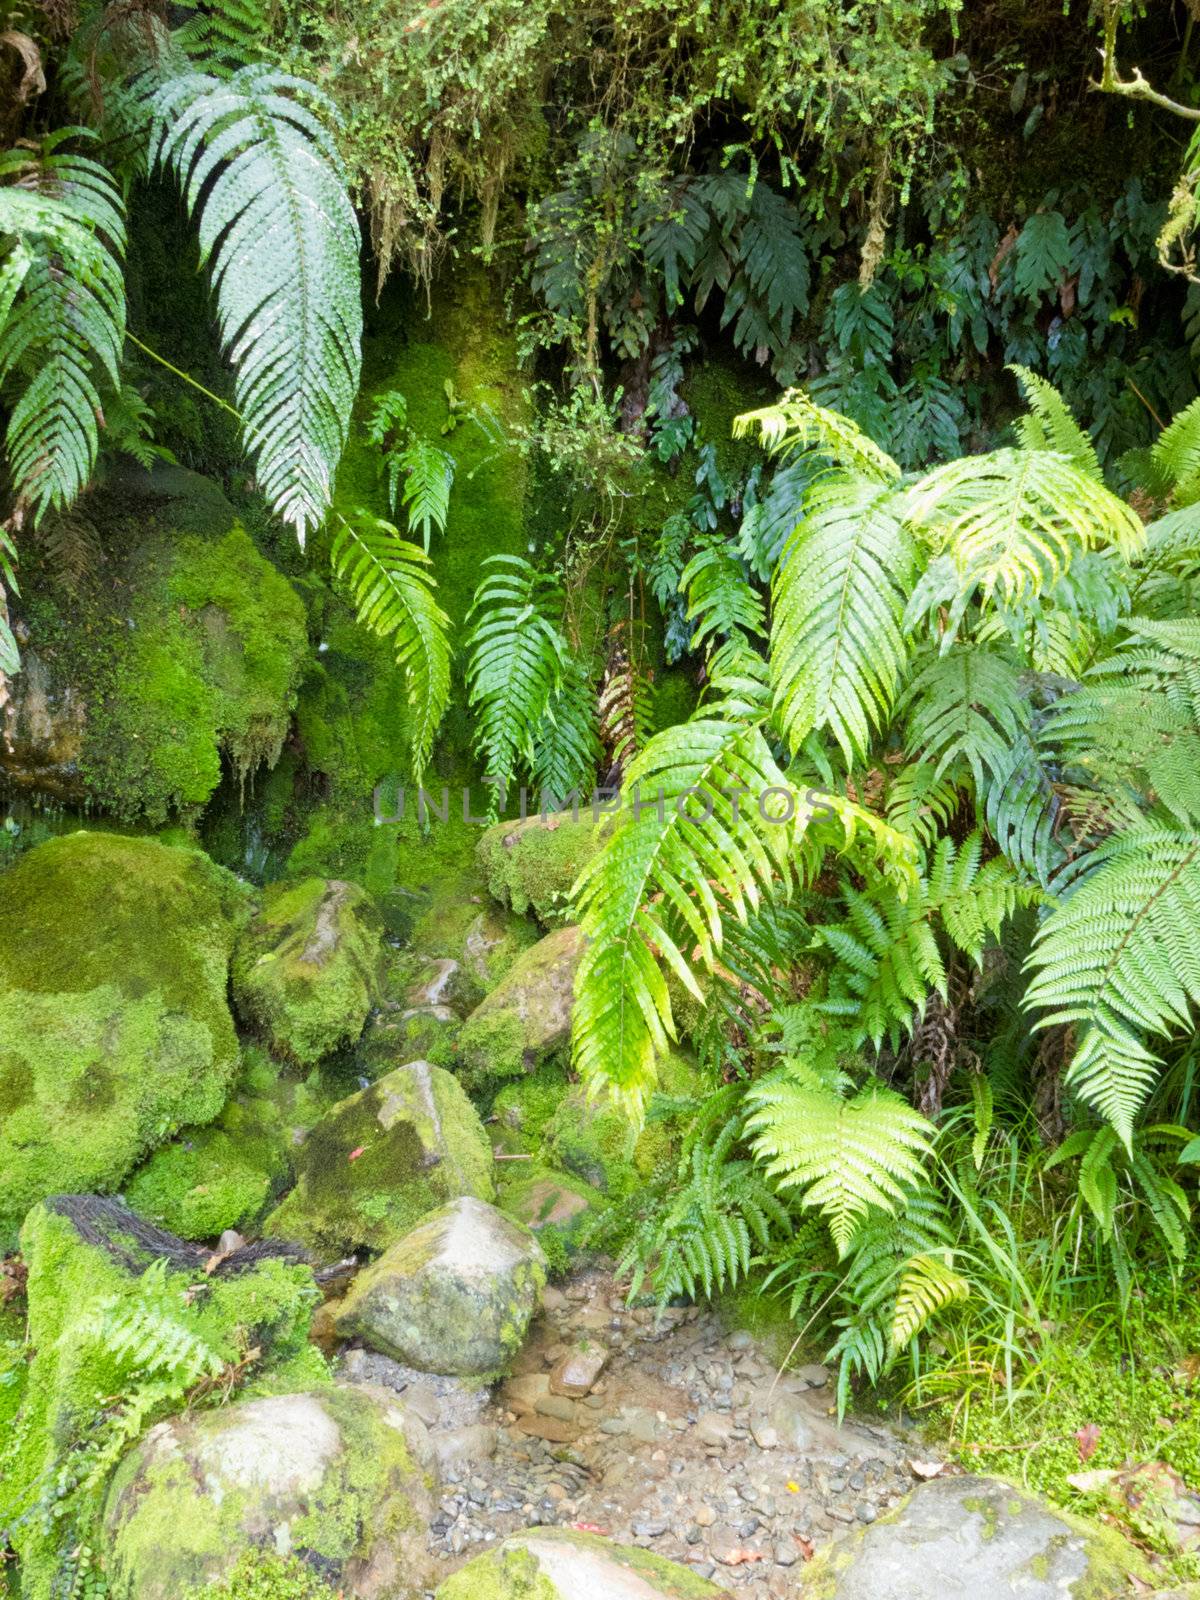 Environmental background of spore forming plants, damp green mossy rocks and lush ferns growing at the base of a shady cliff